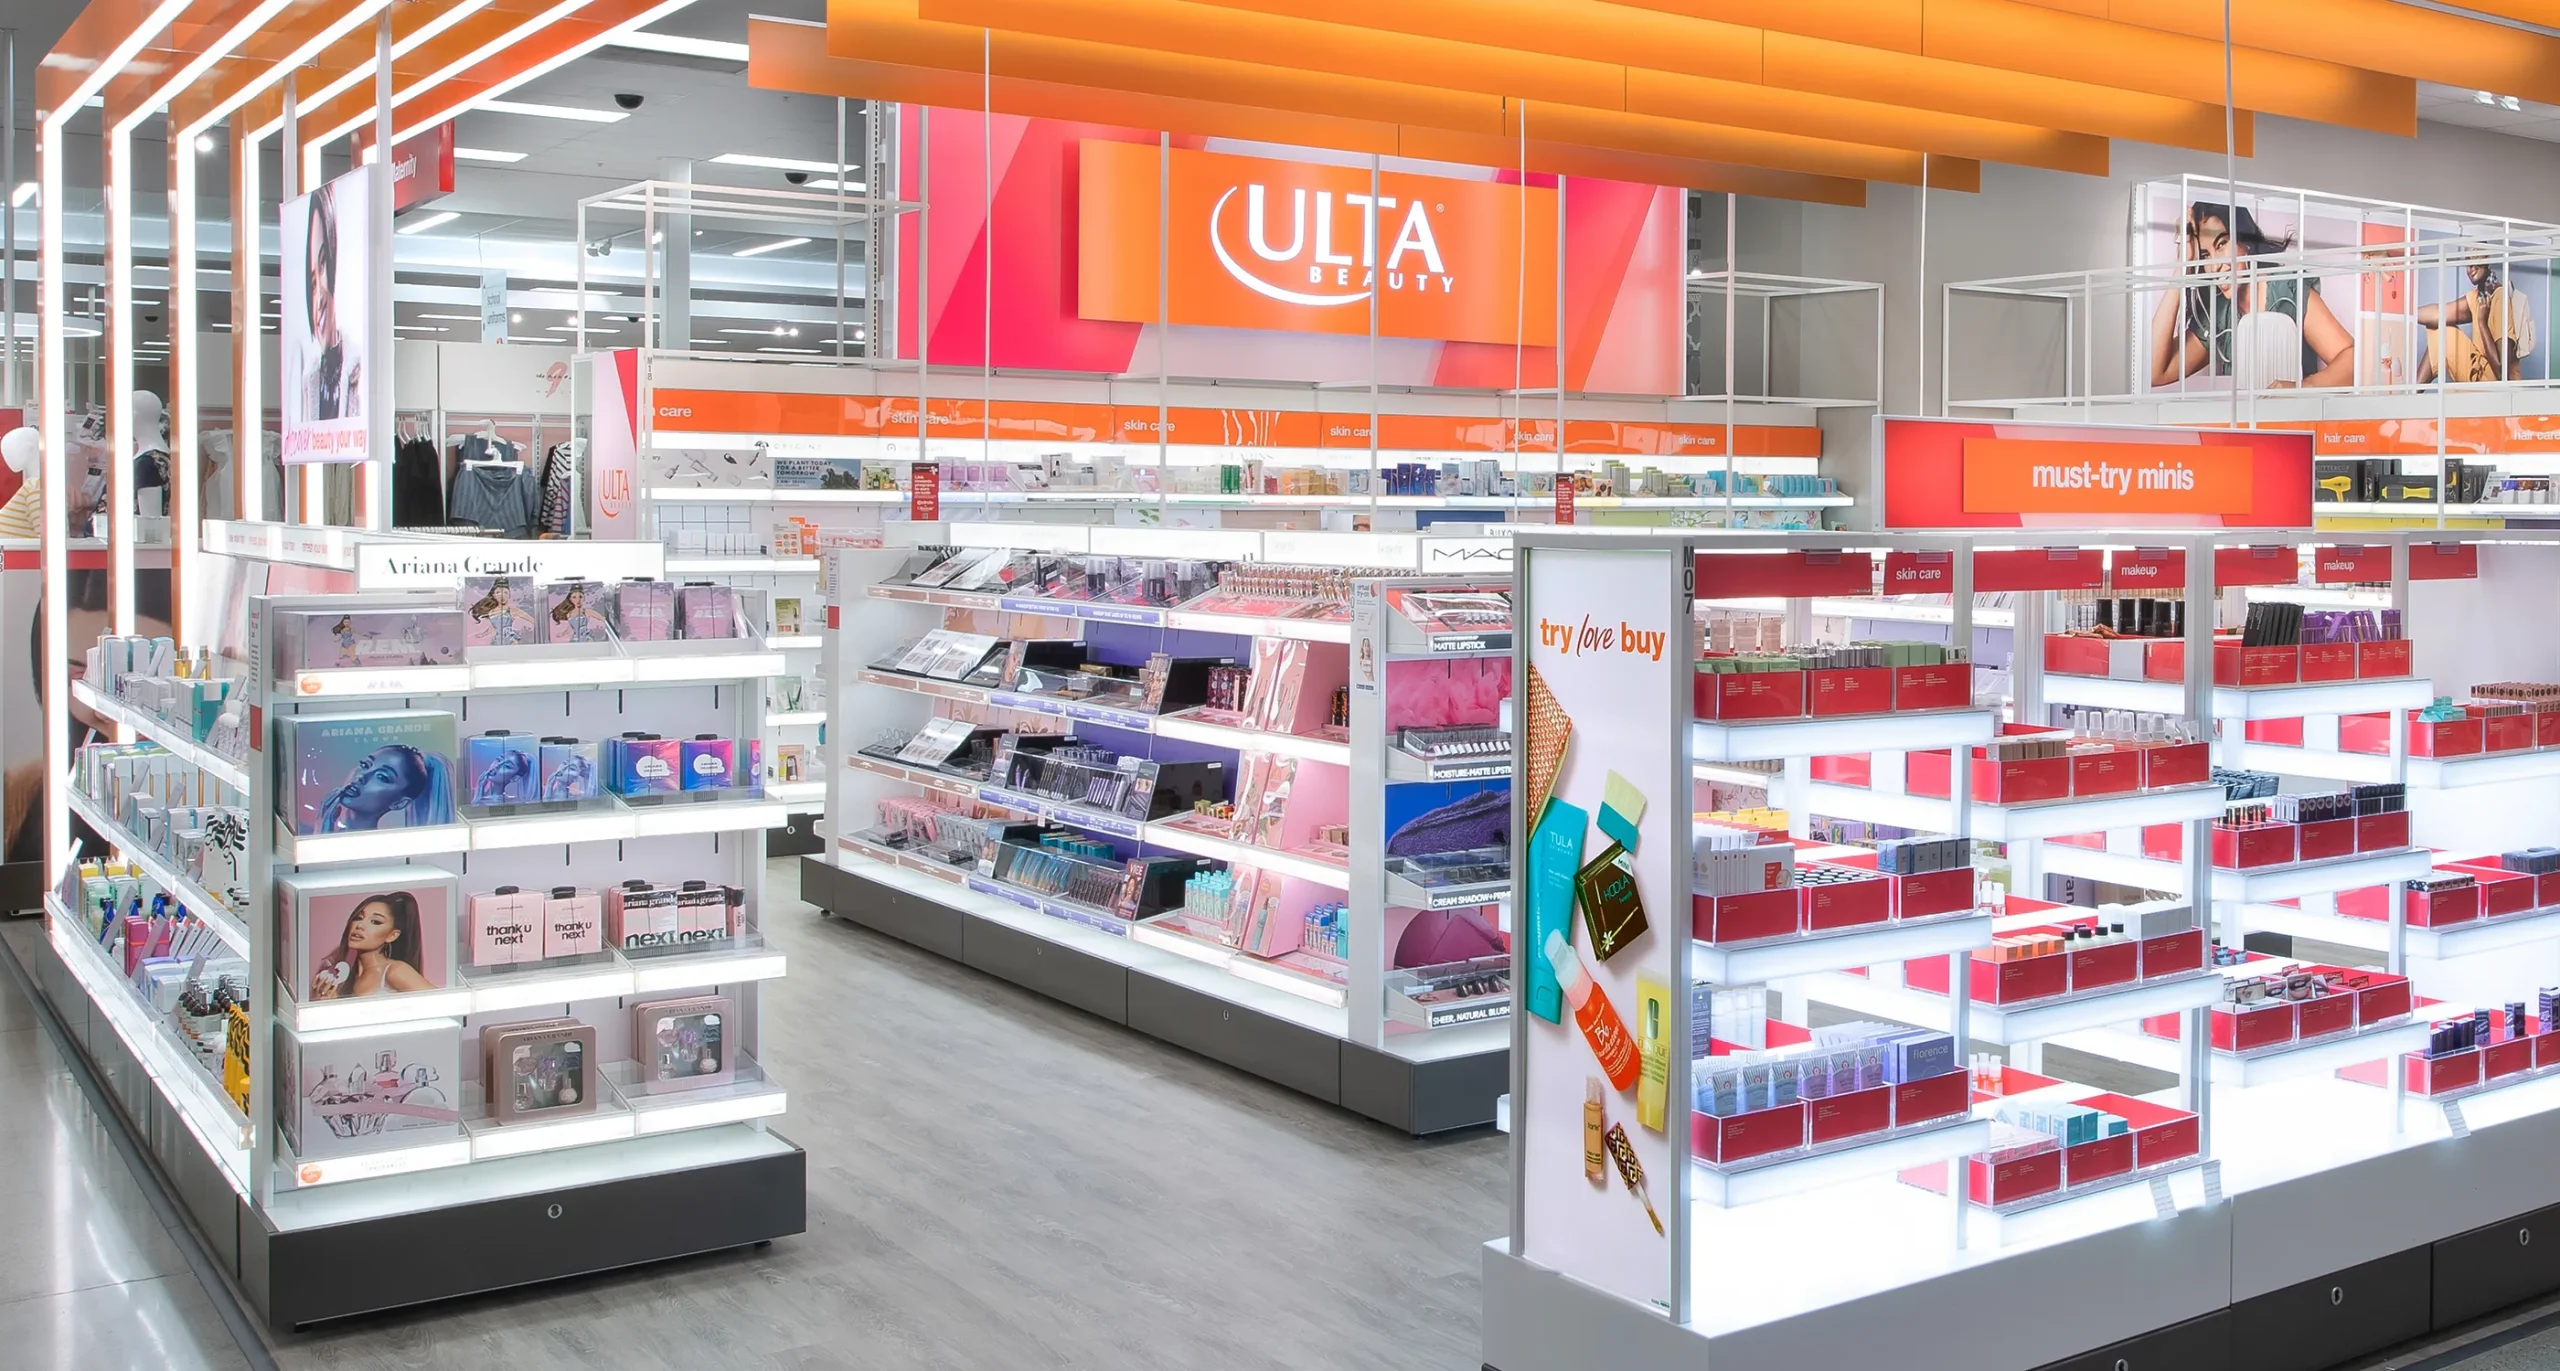 Evaluation and Analysis of Ulta beauty